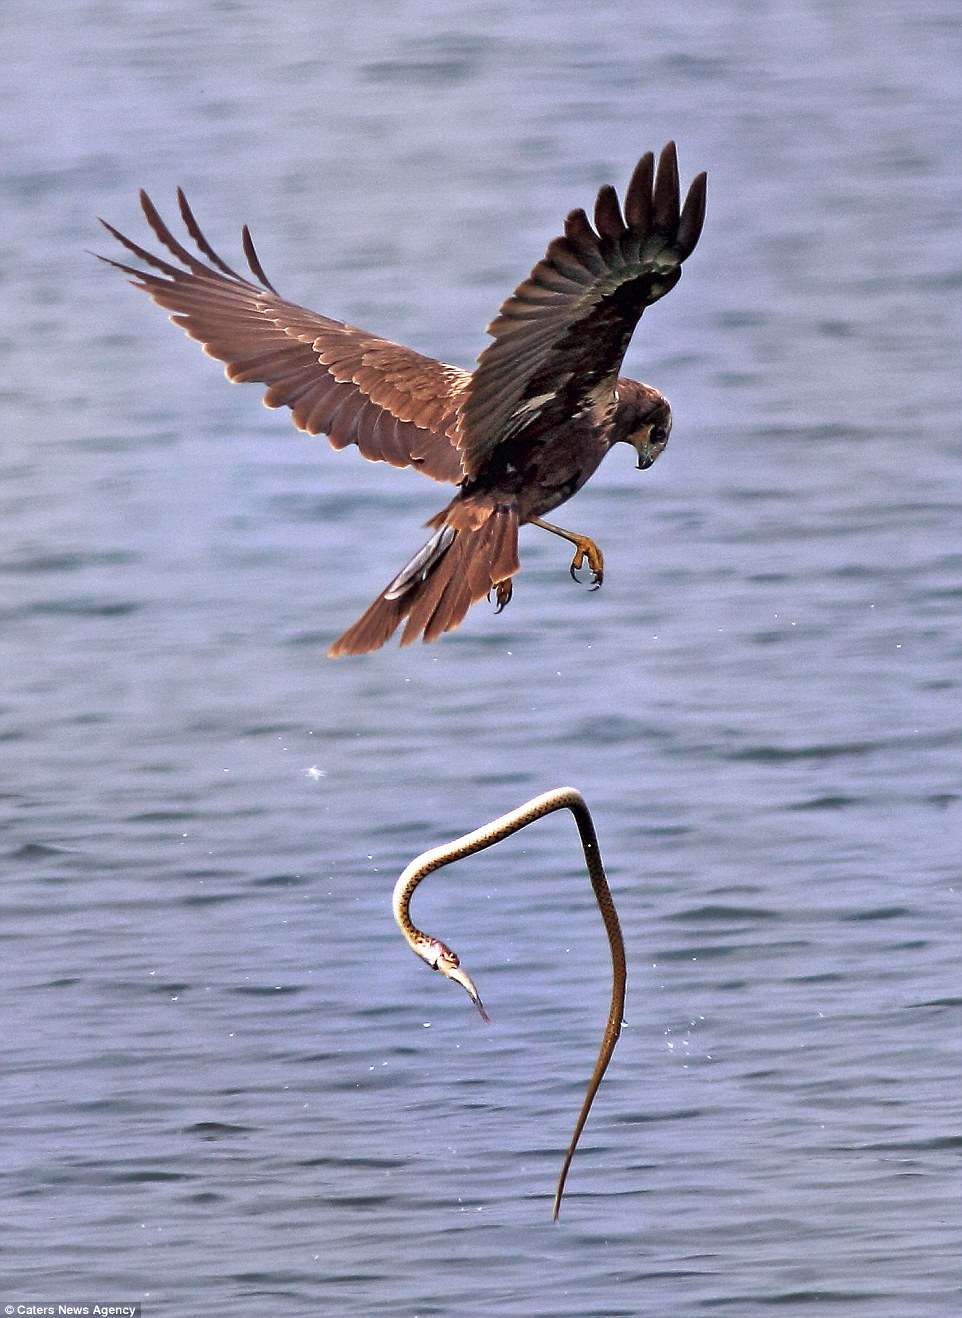 Winner winner, fishy dinner: The victorious snake cannot wait to devour the fish after snatching it from the claws of the eagle